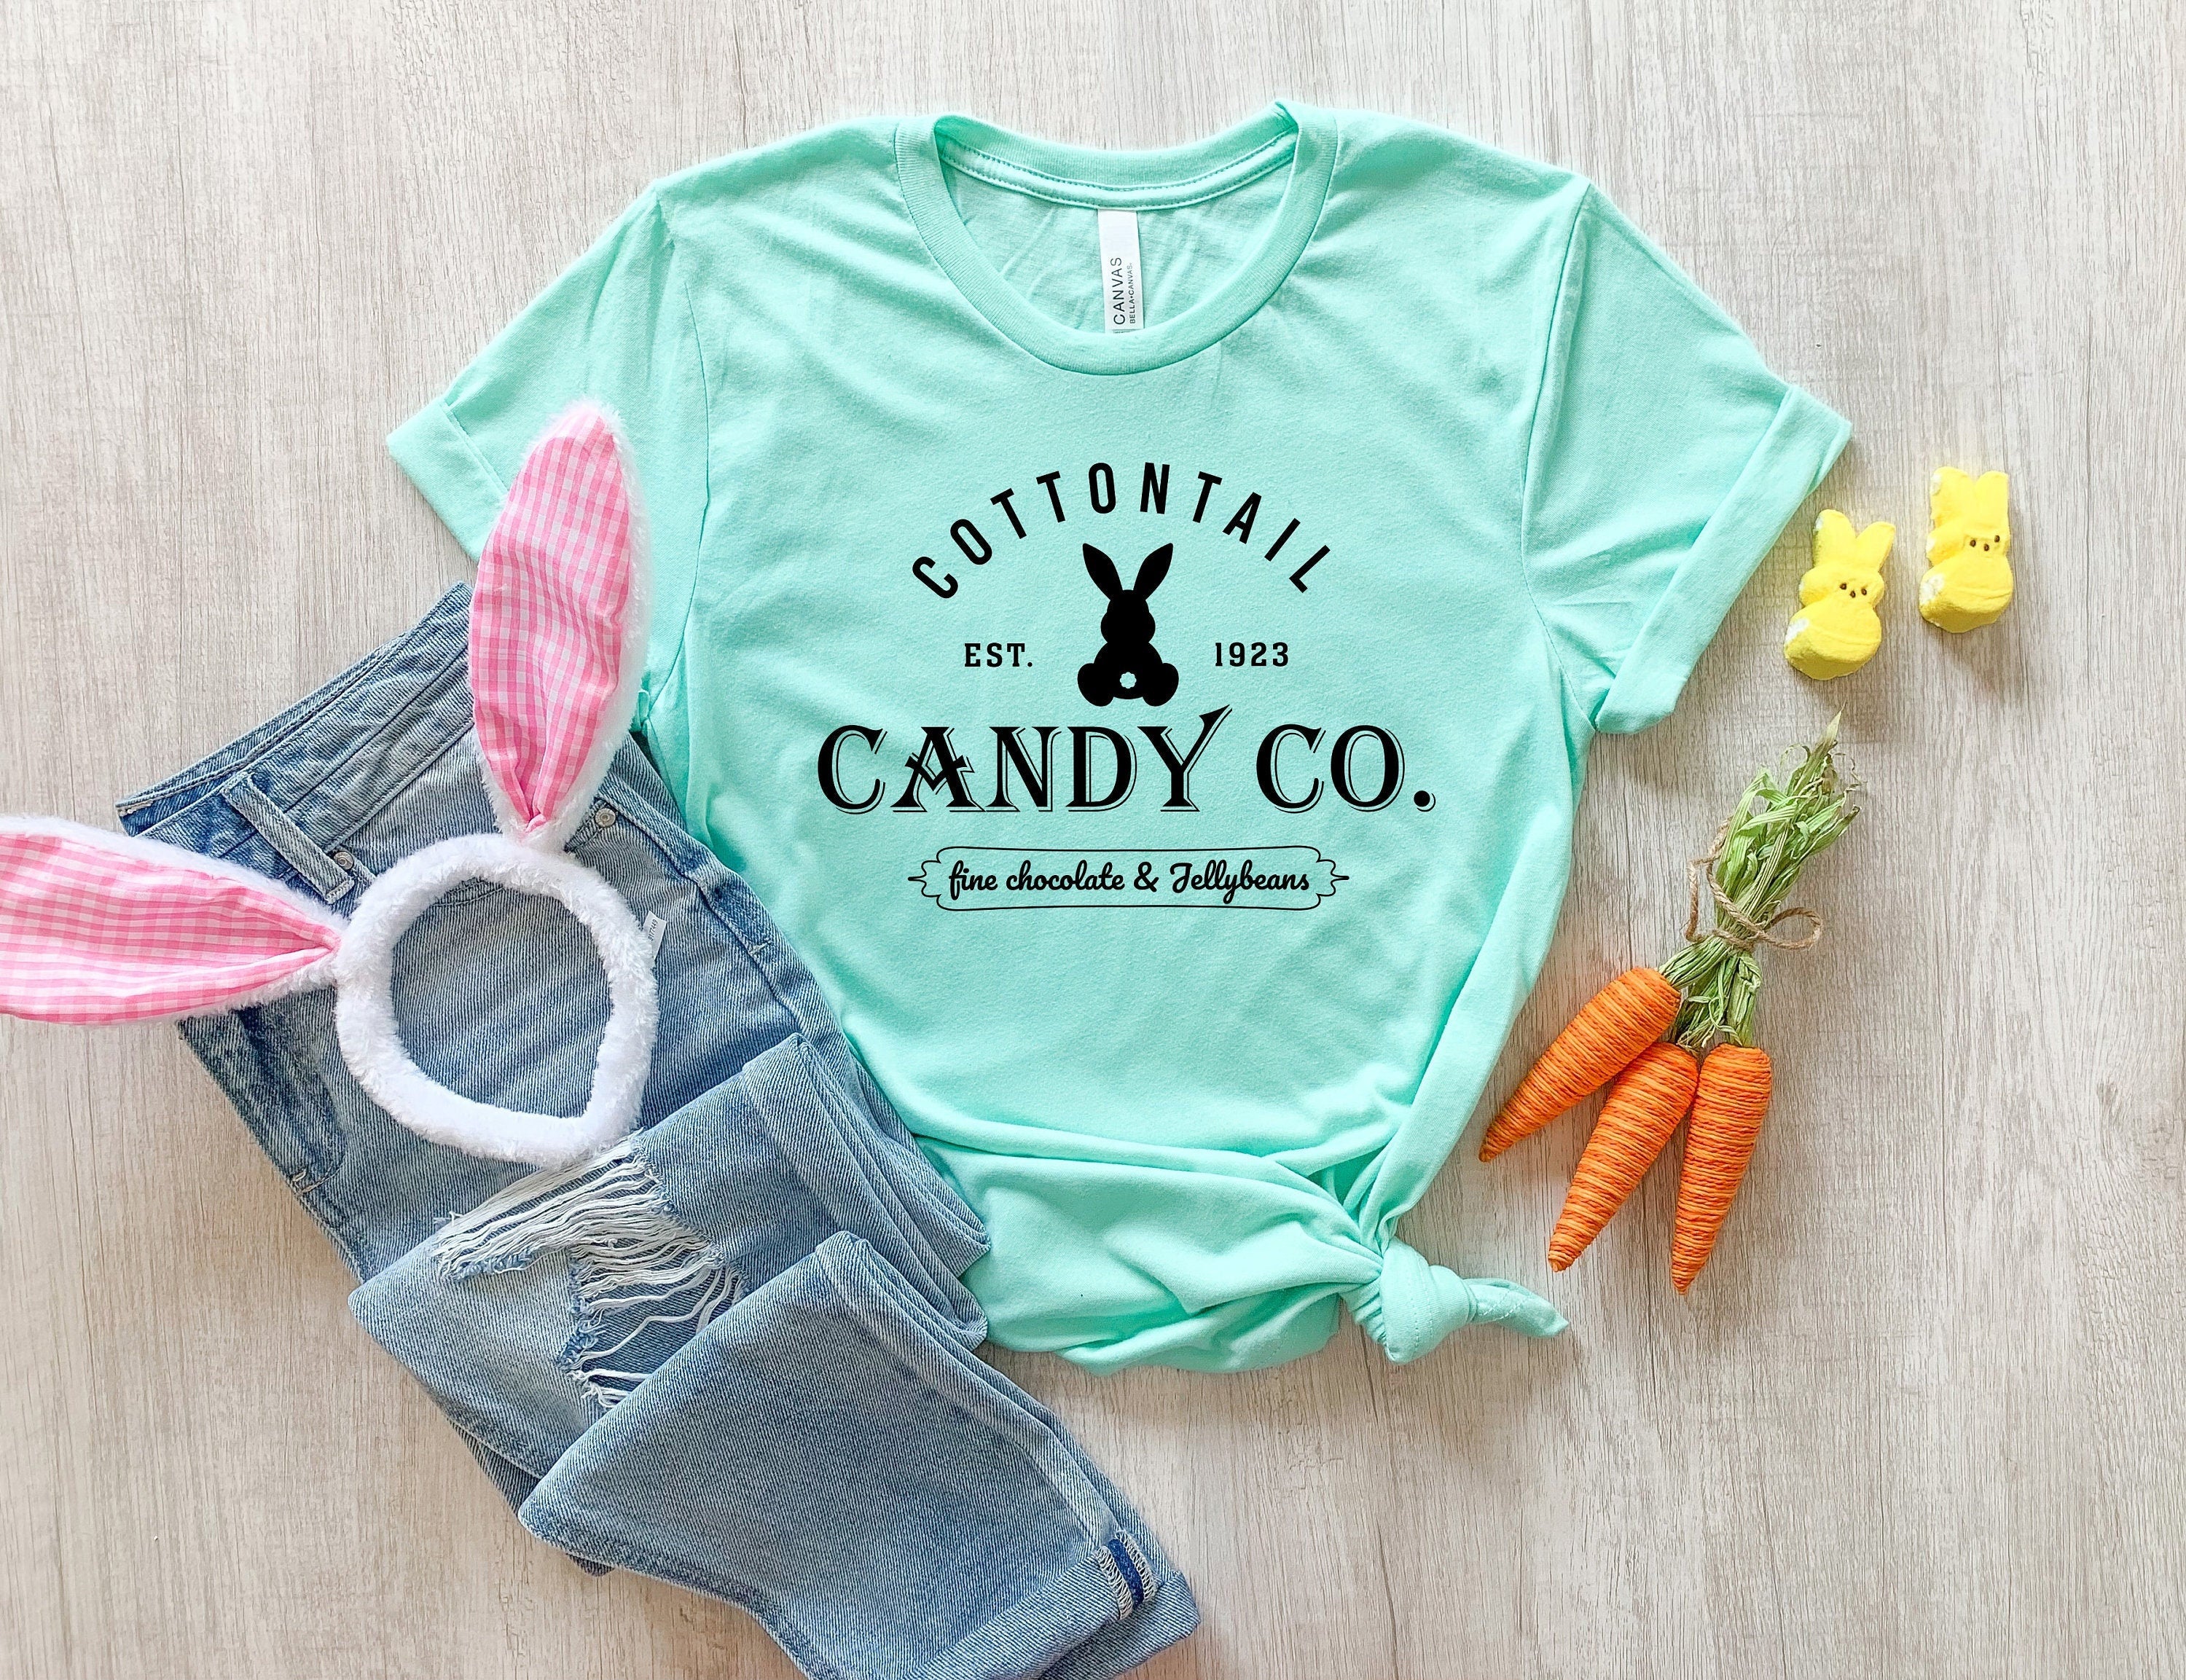 Cottontail Candy Co Shirt